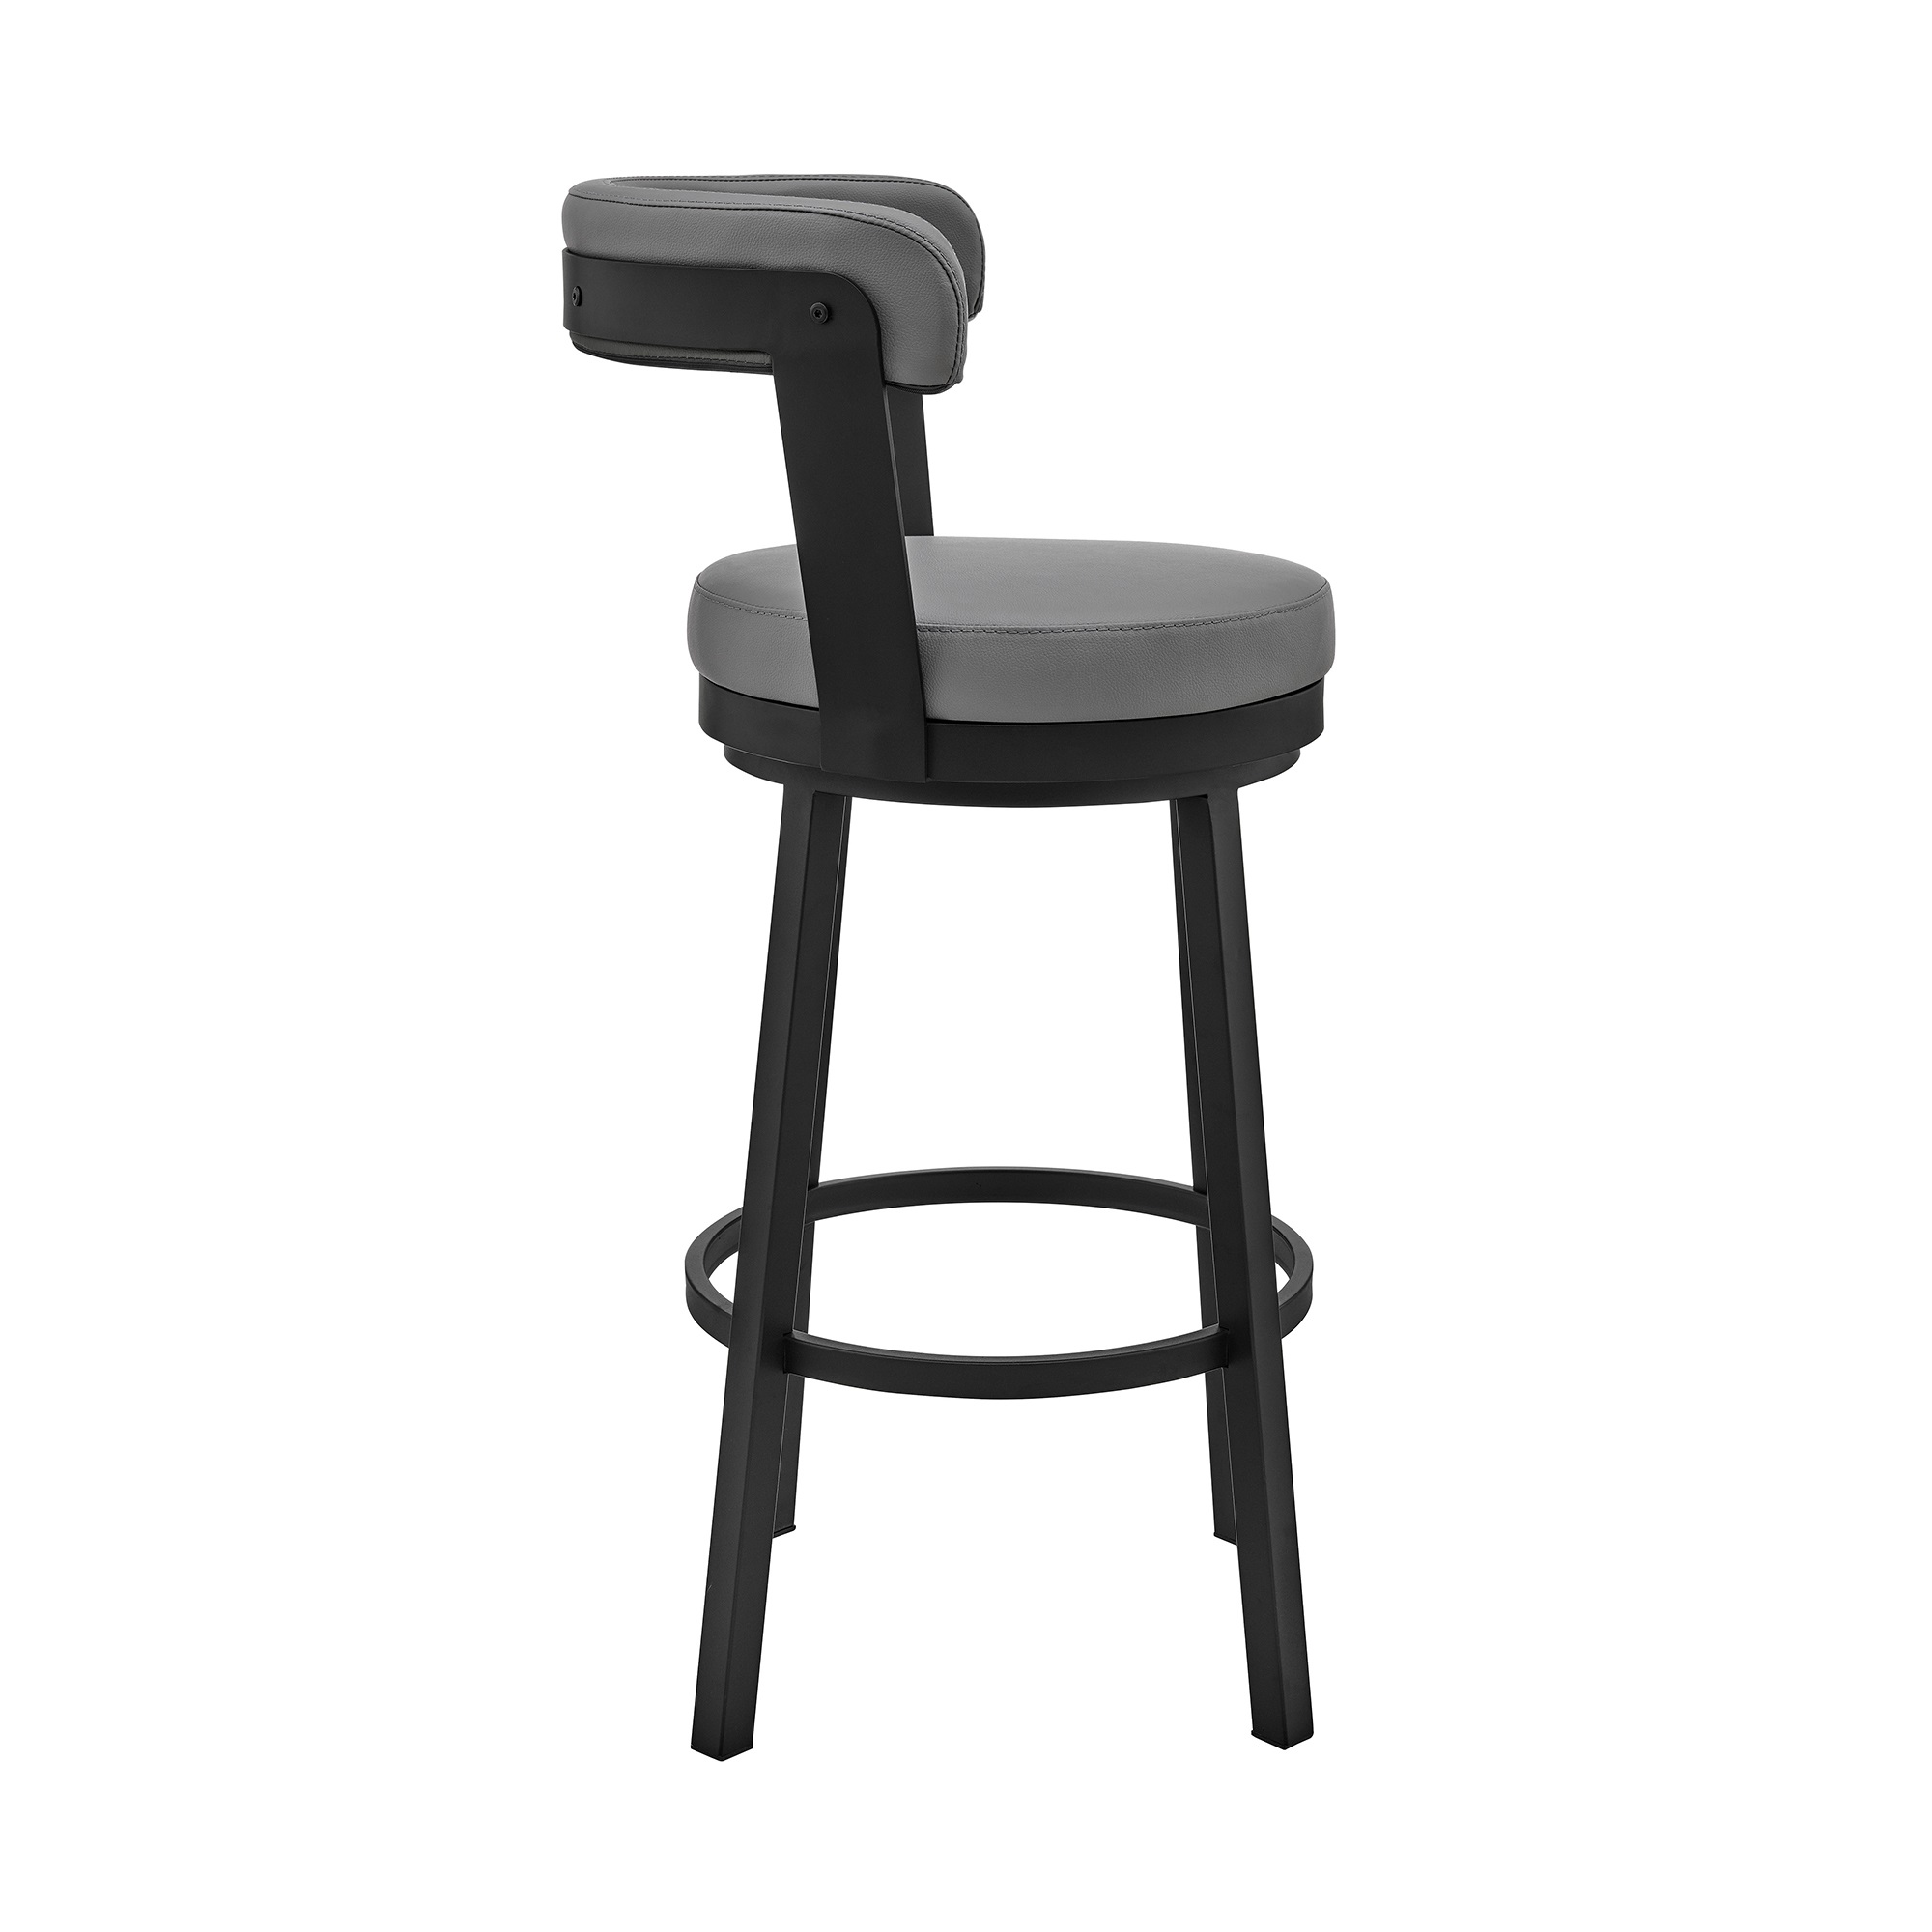 Armen Living Bryant 26" Counter Height Swivel Bar Stool in Black Finish and Gray Faux Leather